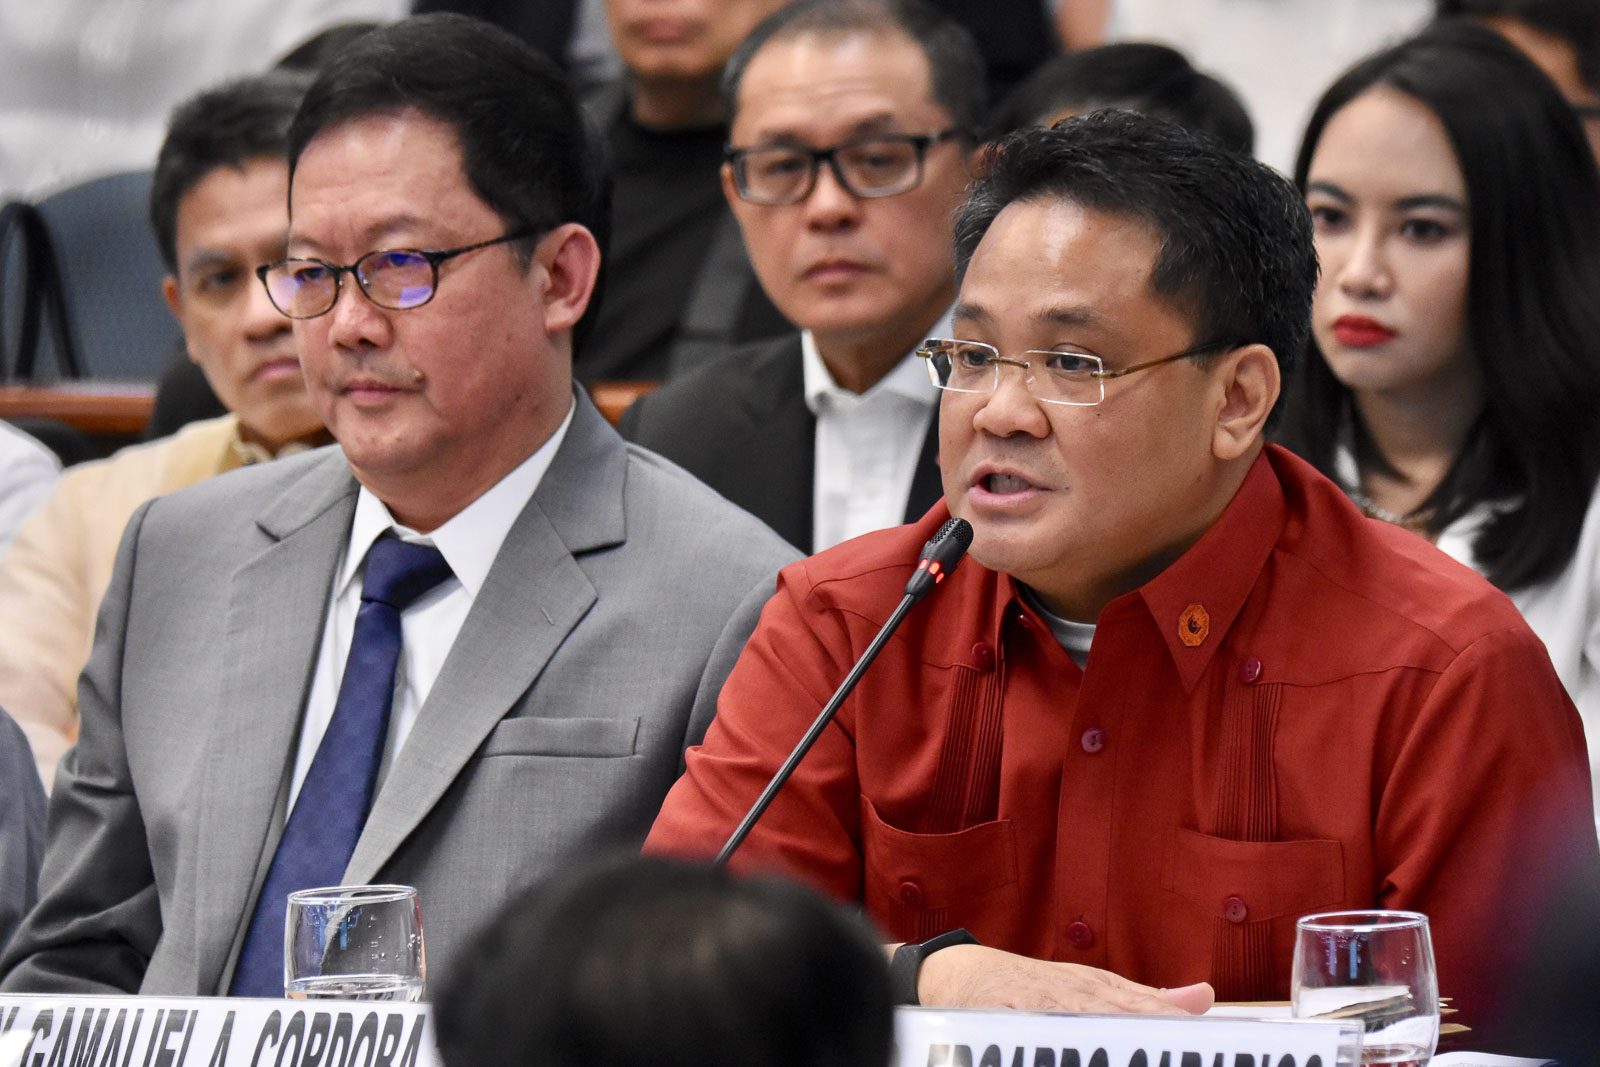 PAY-PER-VIEW OK. Commissioner Gamaliel Cordoba of the National Telecommunications Commision answers questions from the senators at the hearing on the franchise renewal of ABS-CBN network on February 24, 2020. Photo by Angie de Silva/Rappler 